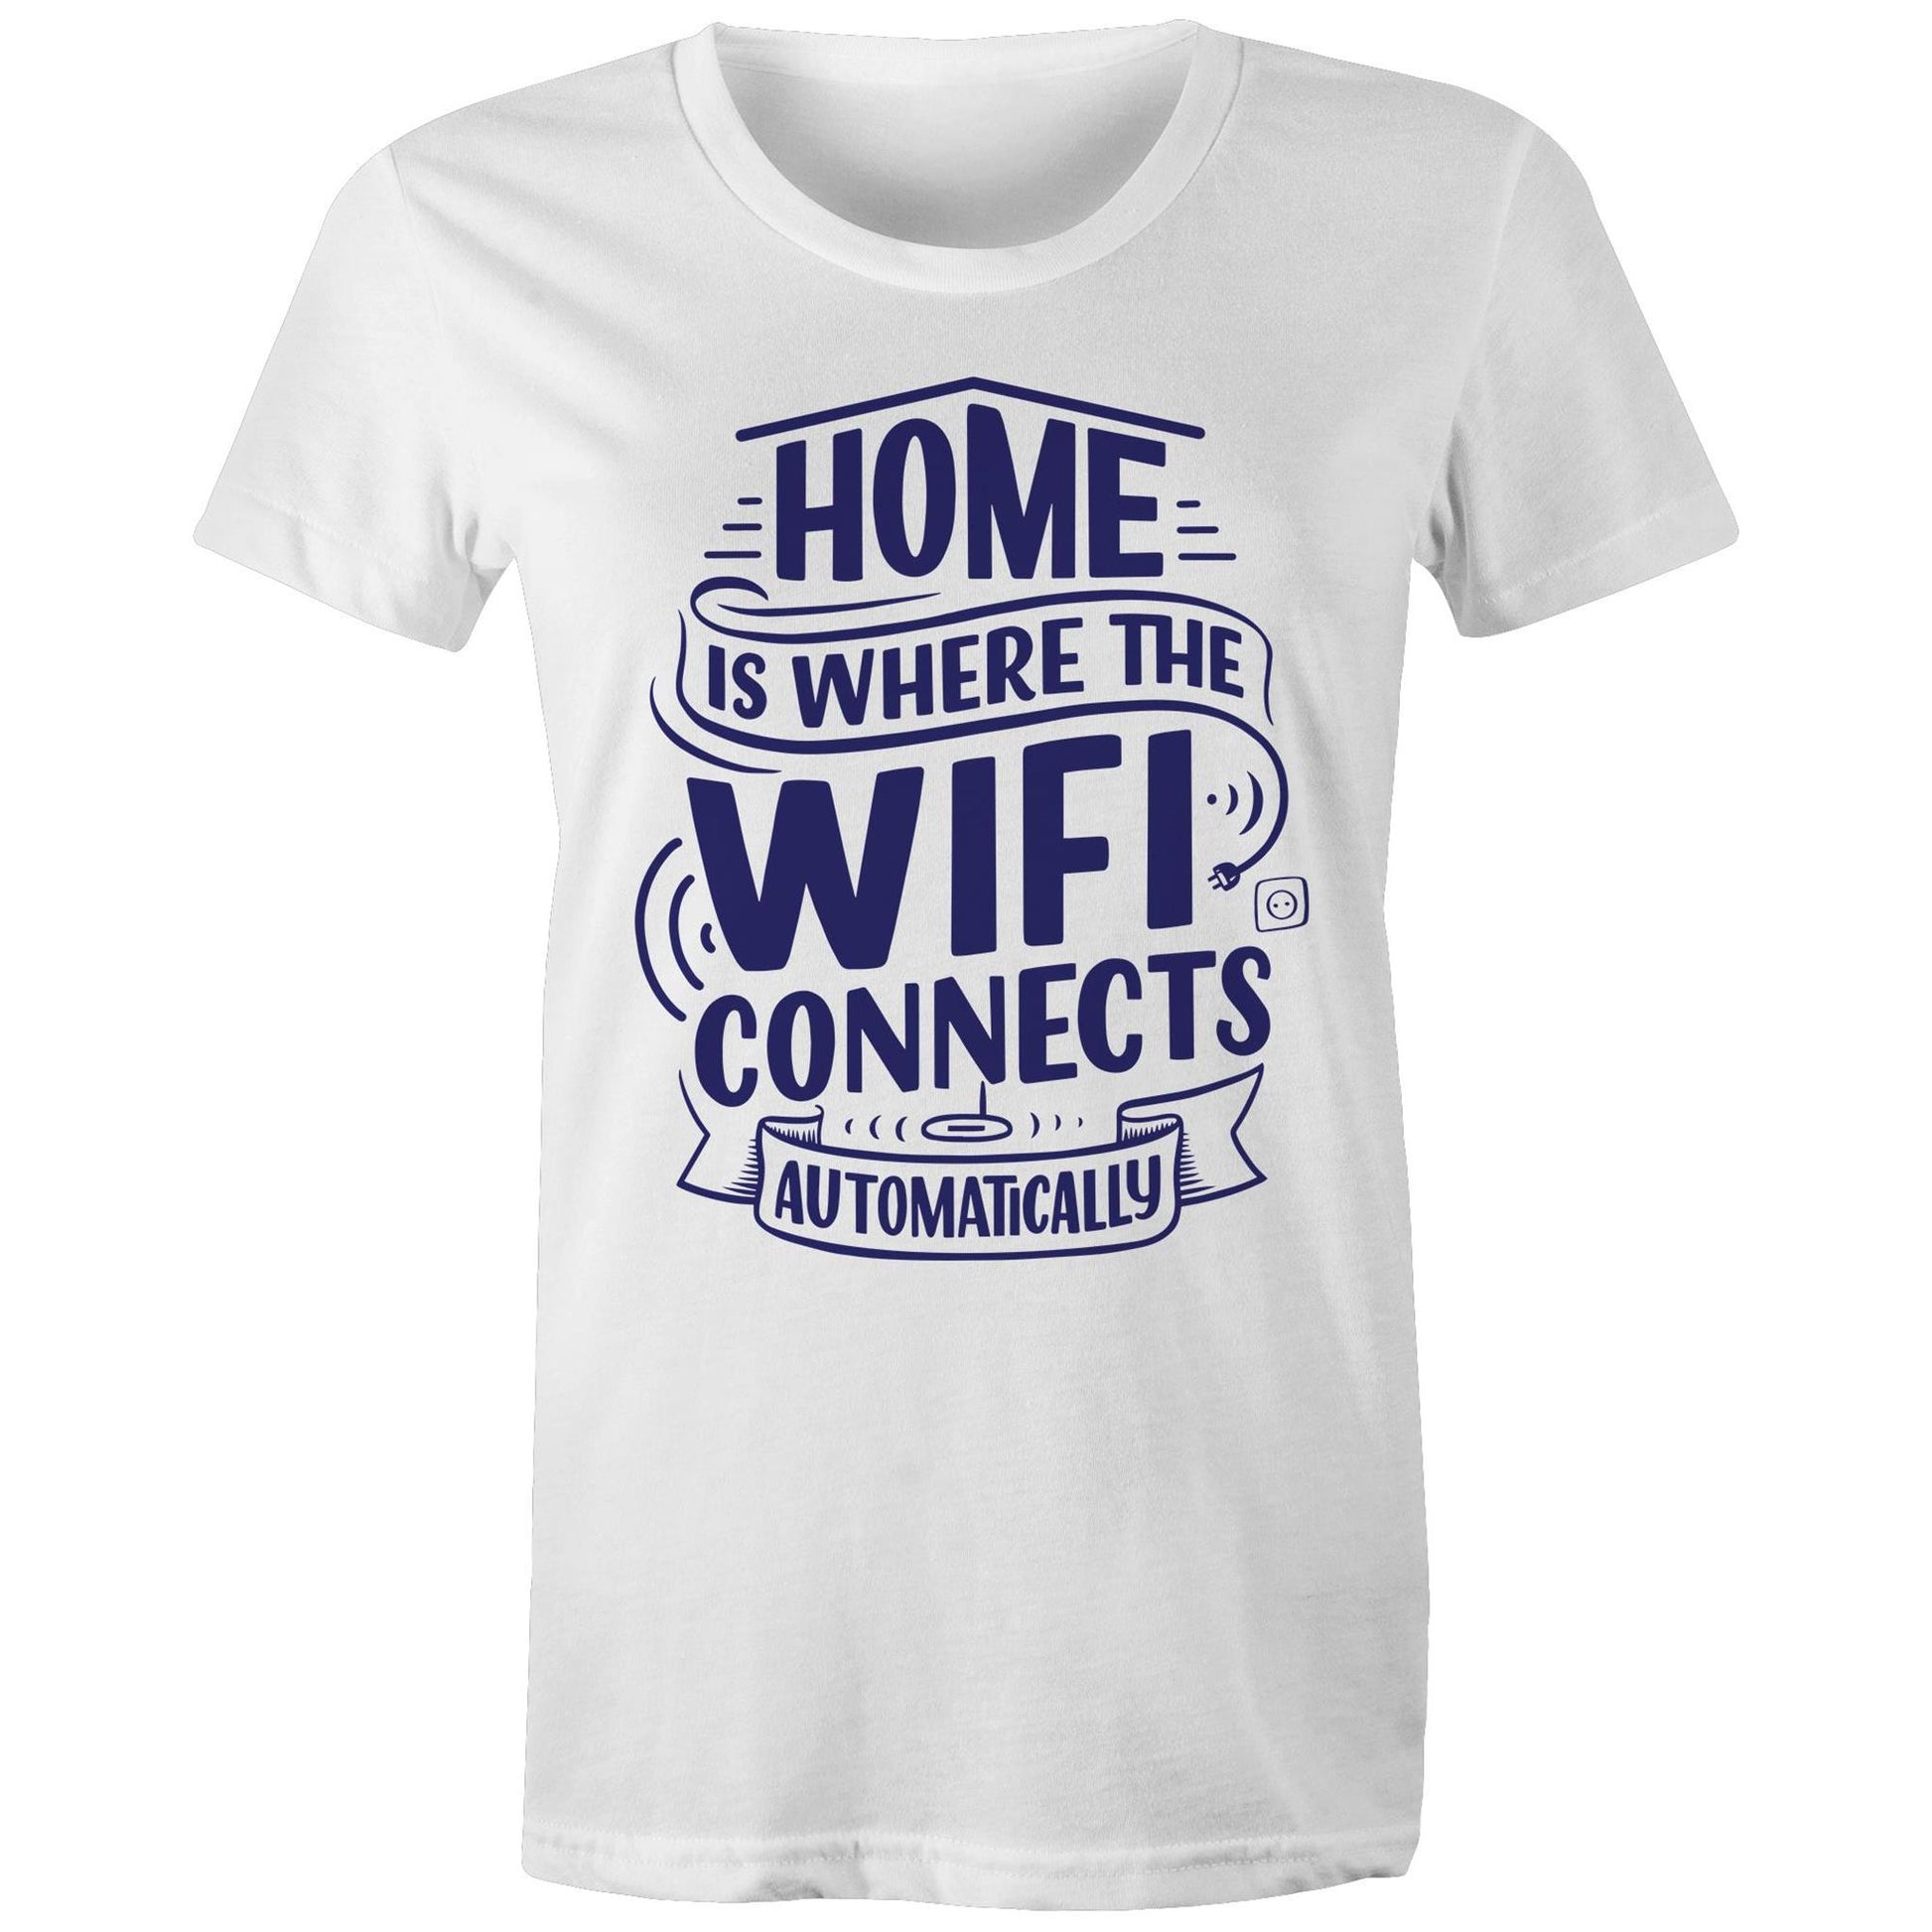 Home Is Where The WIFI Connects Automatically - Womens T-shirt White Womens T-shirt Tech